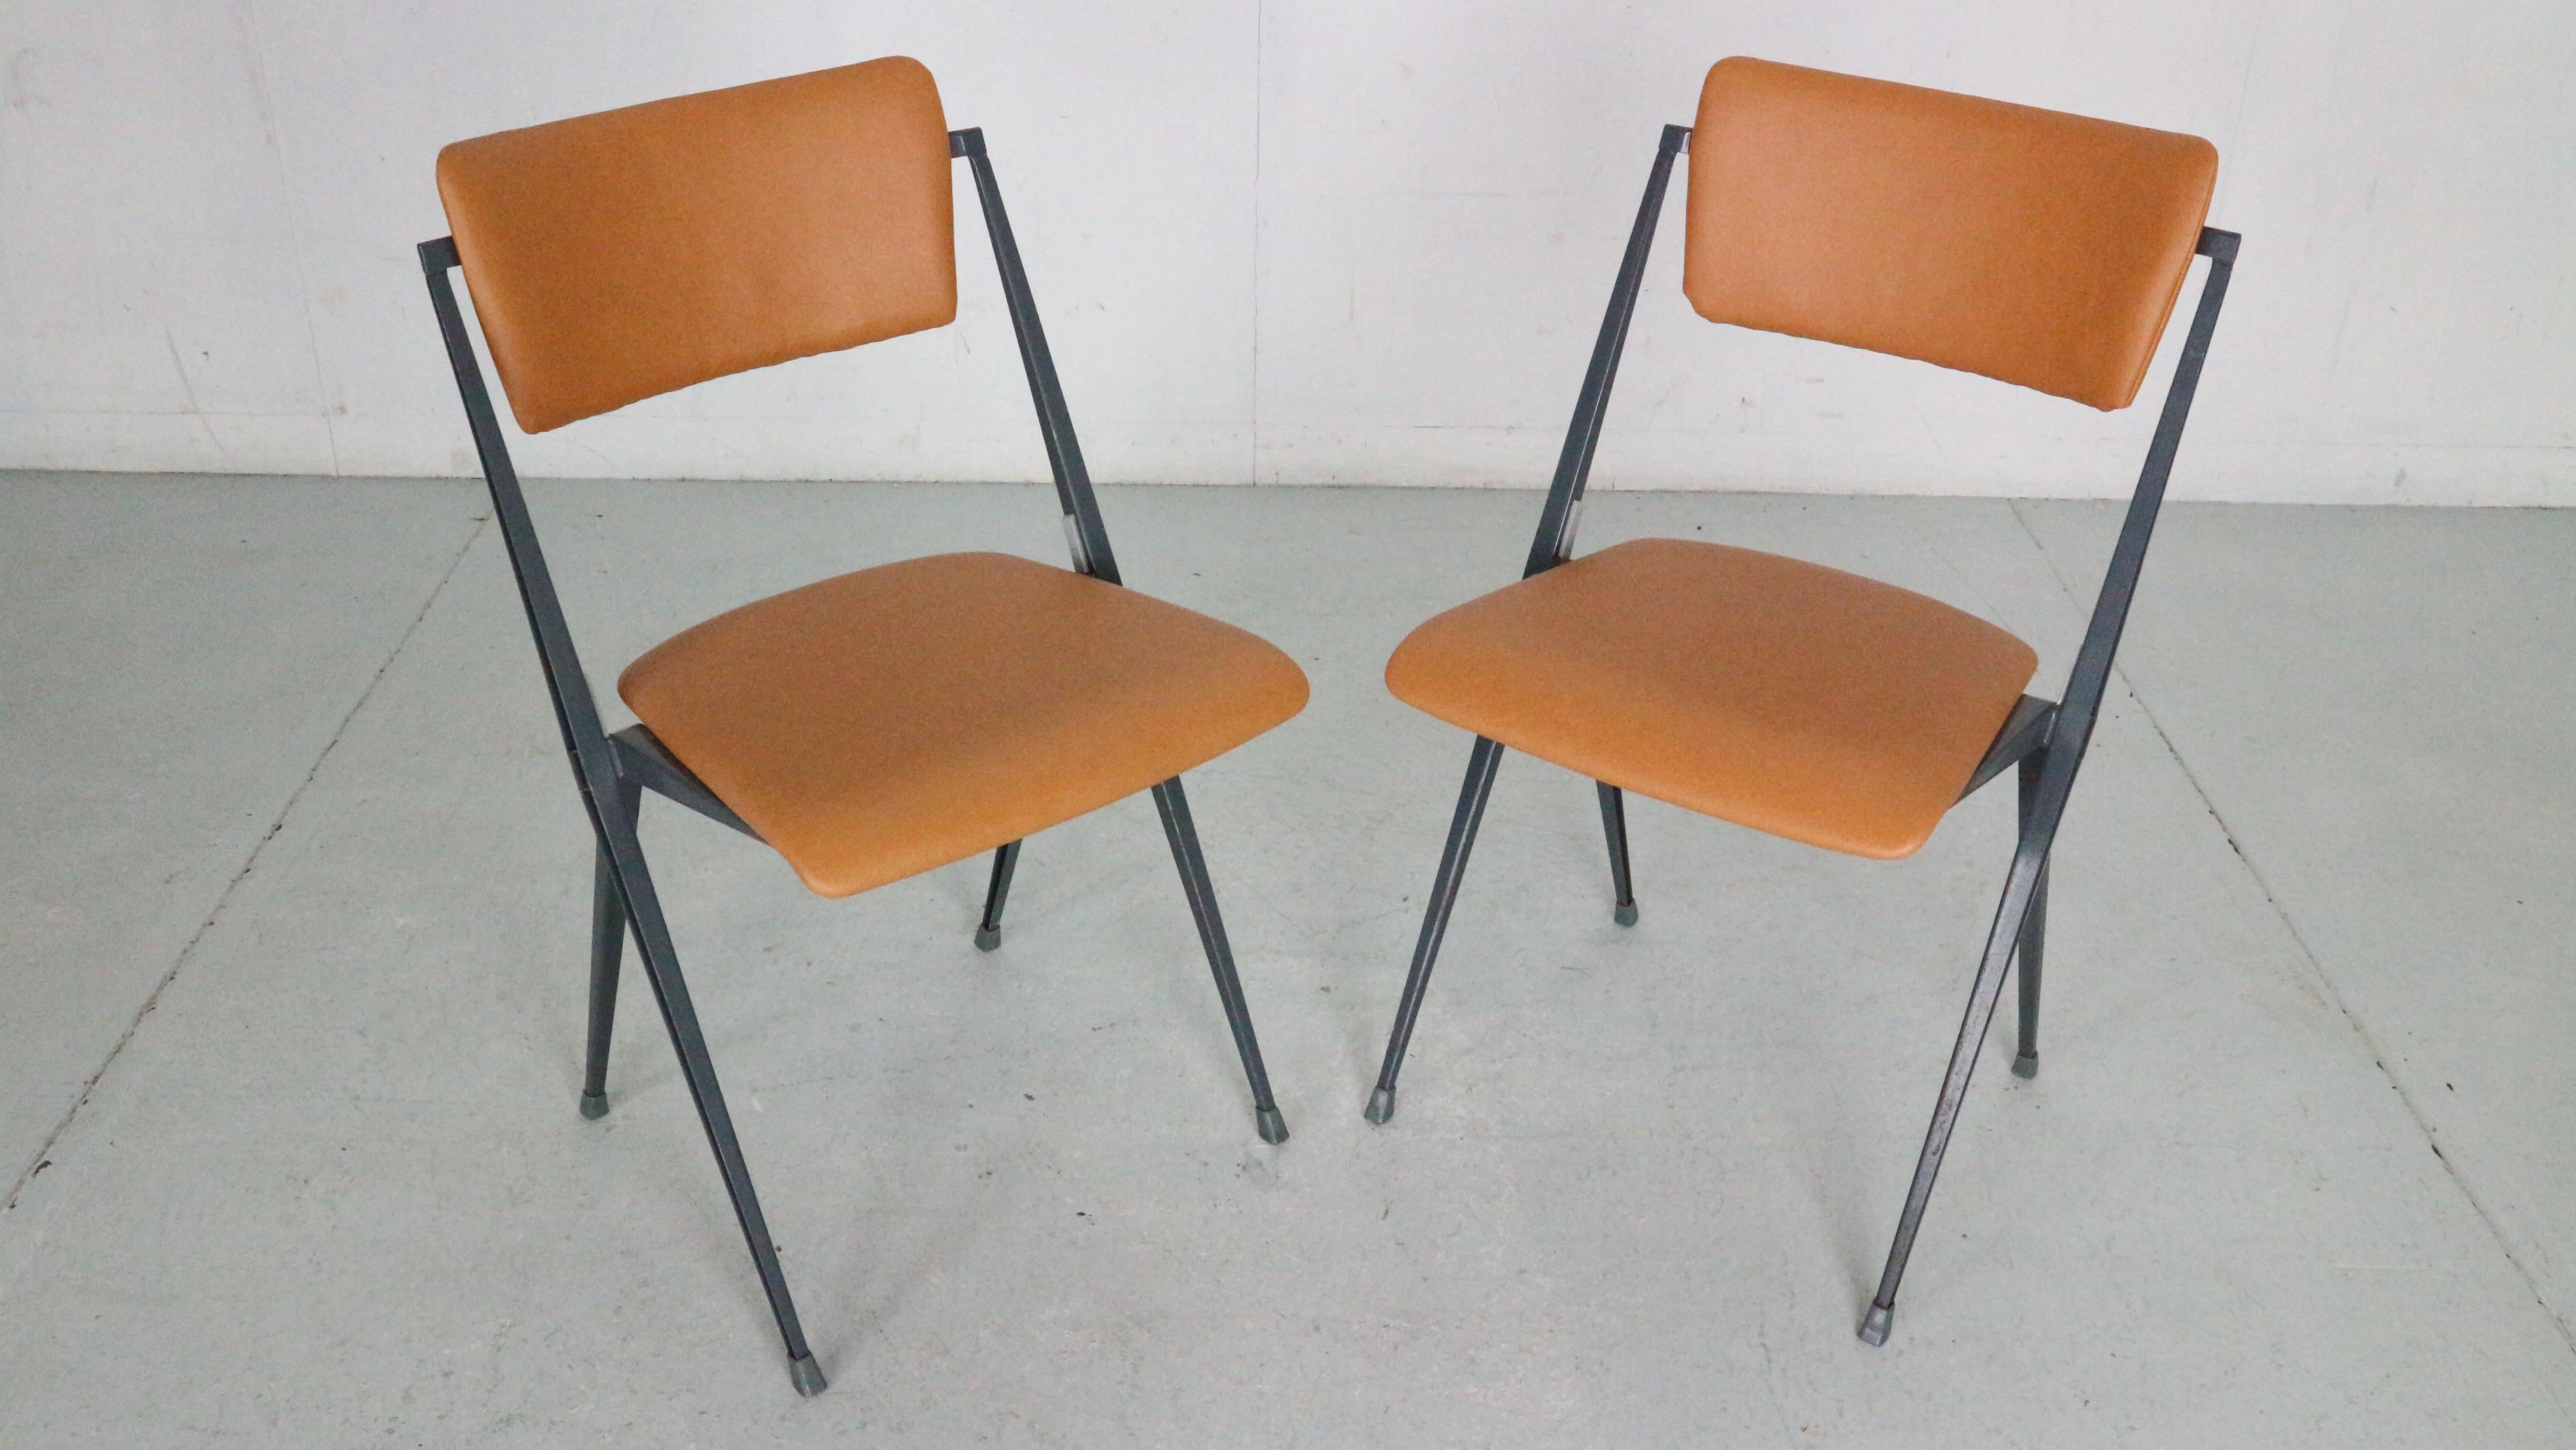 Wim Rietveld Set Of 4 Pyramide Chairs For De Cirkel, 1966 Netherlands For Sale 6